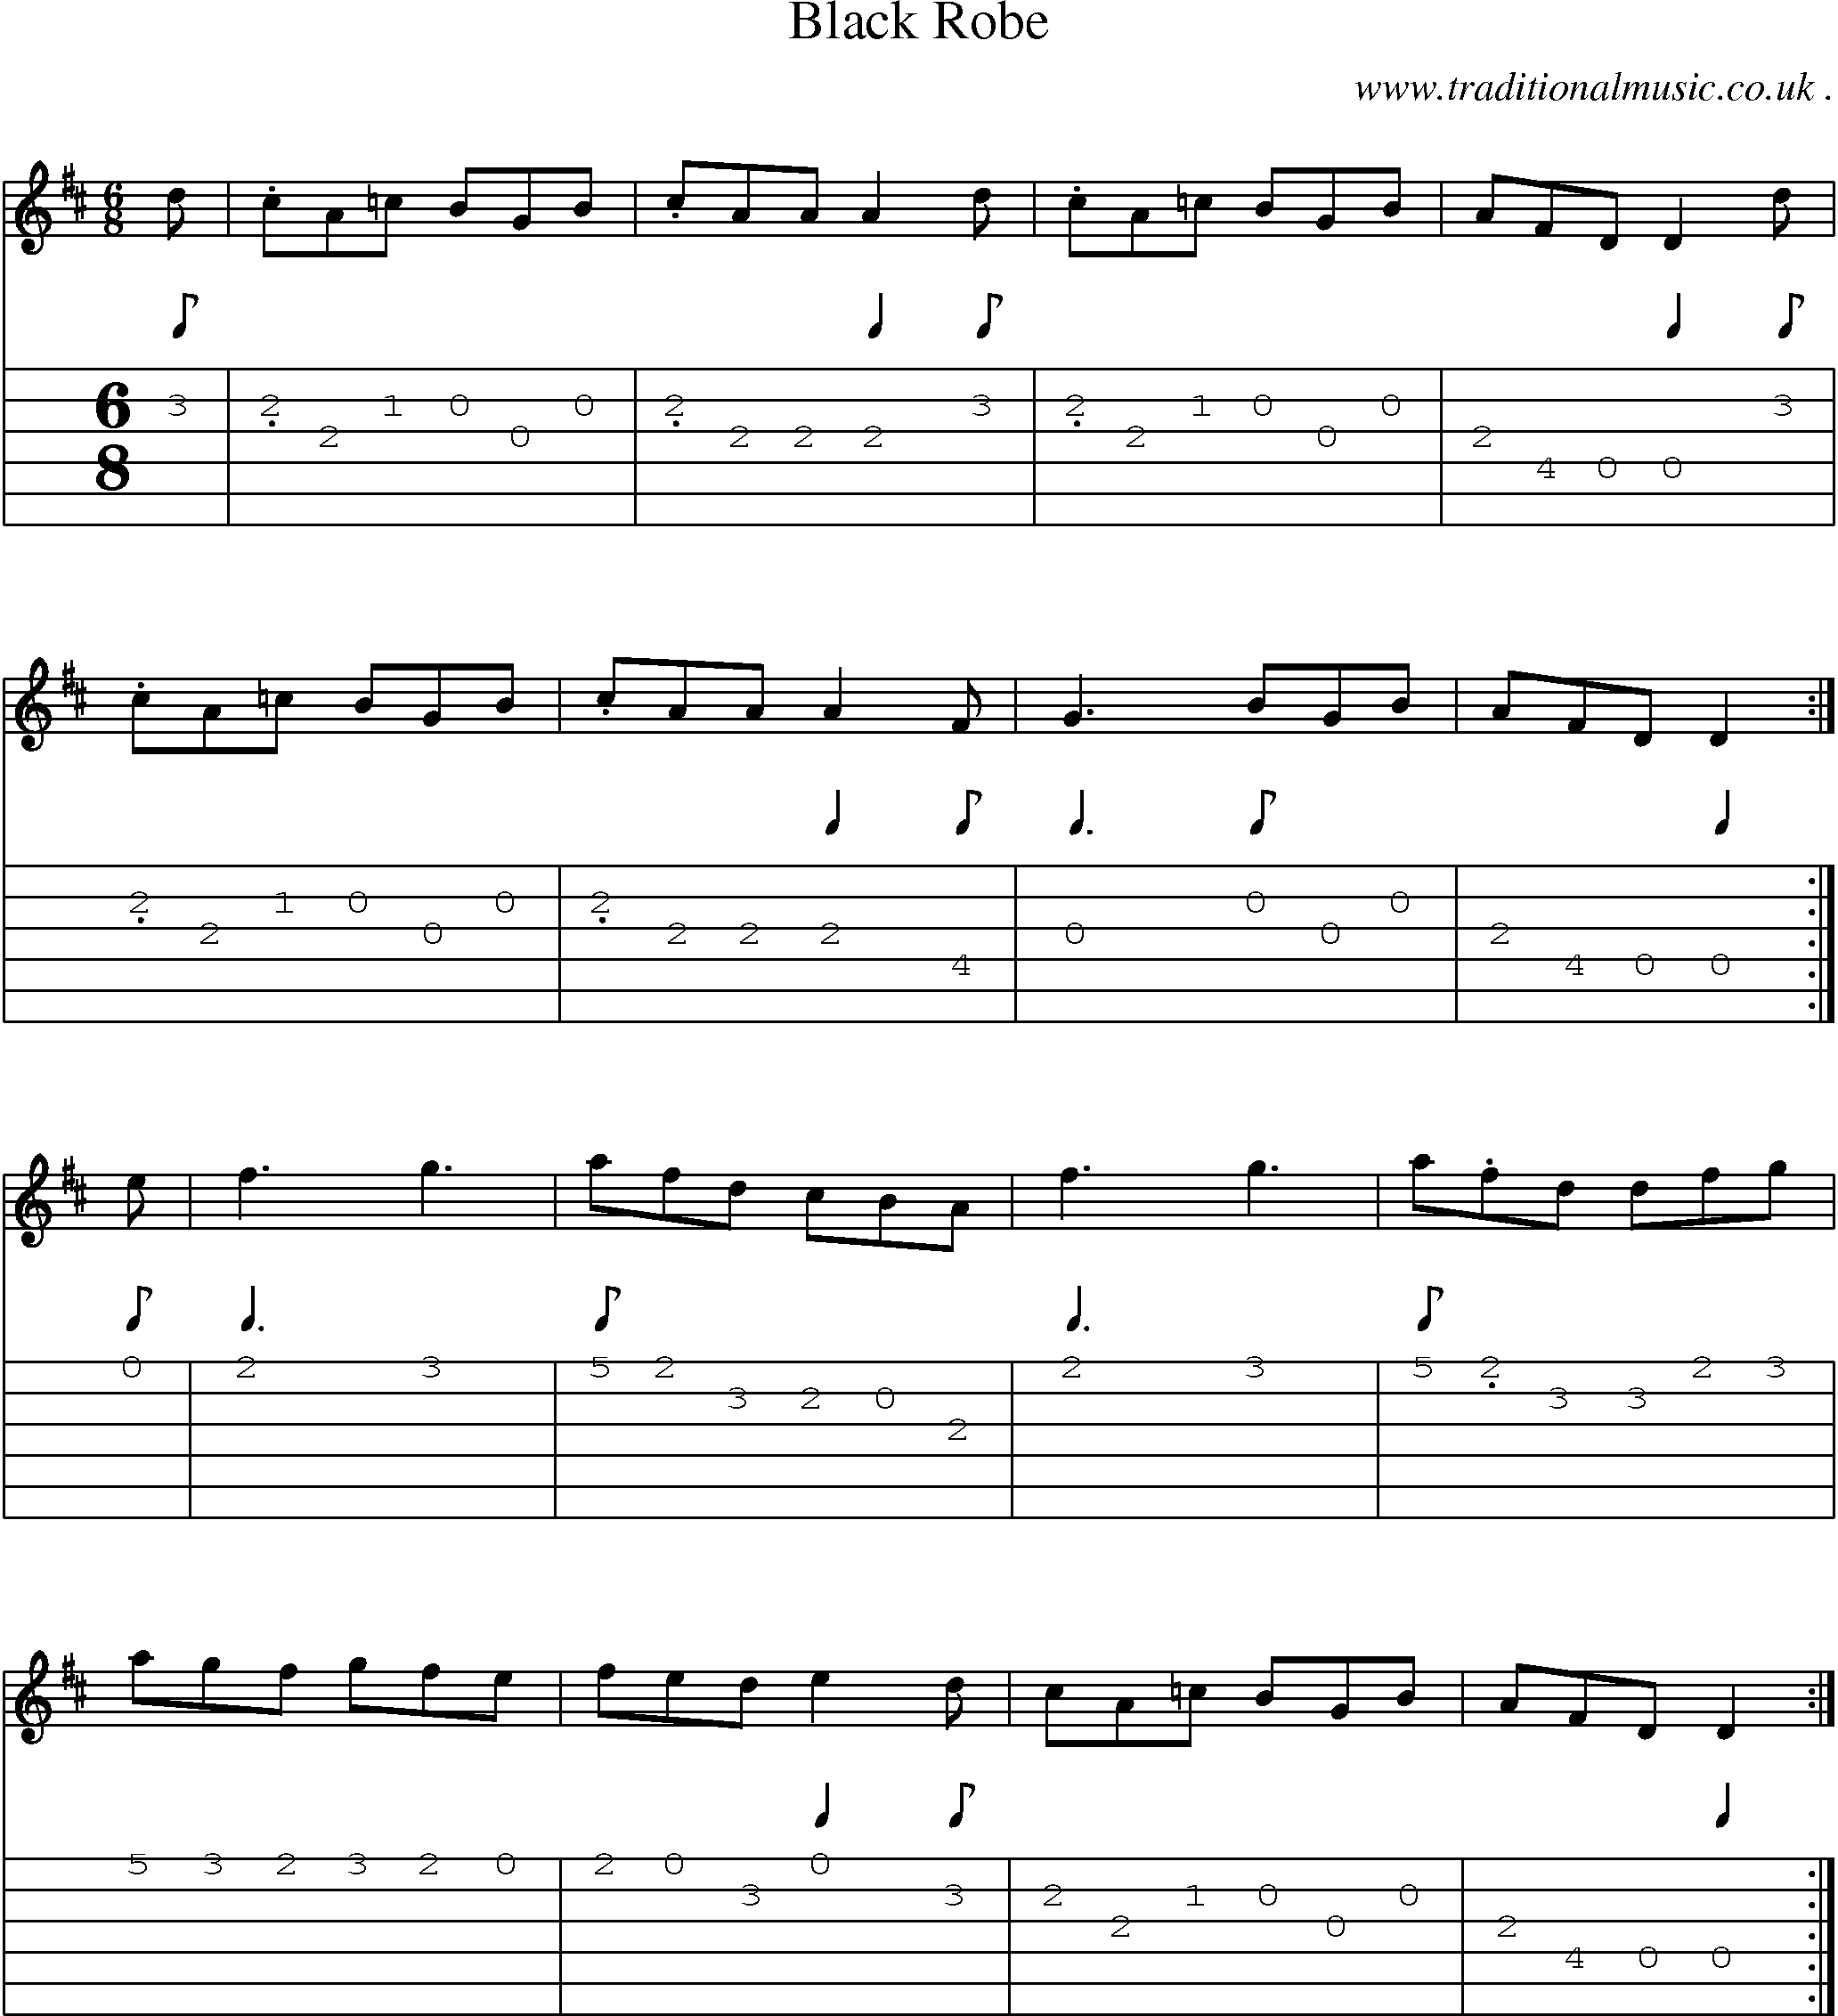 Sheet-Music and Guitar Tabs for Black Robe